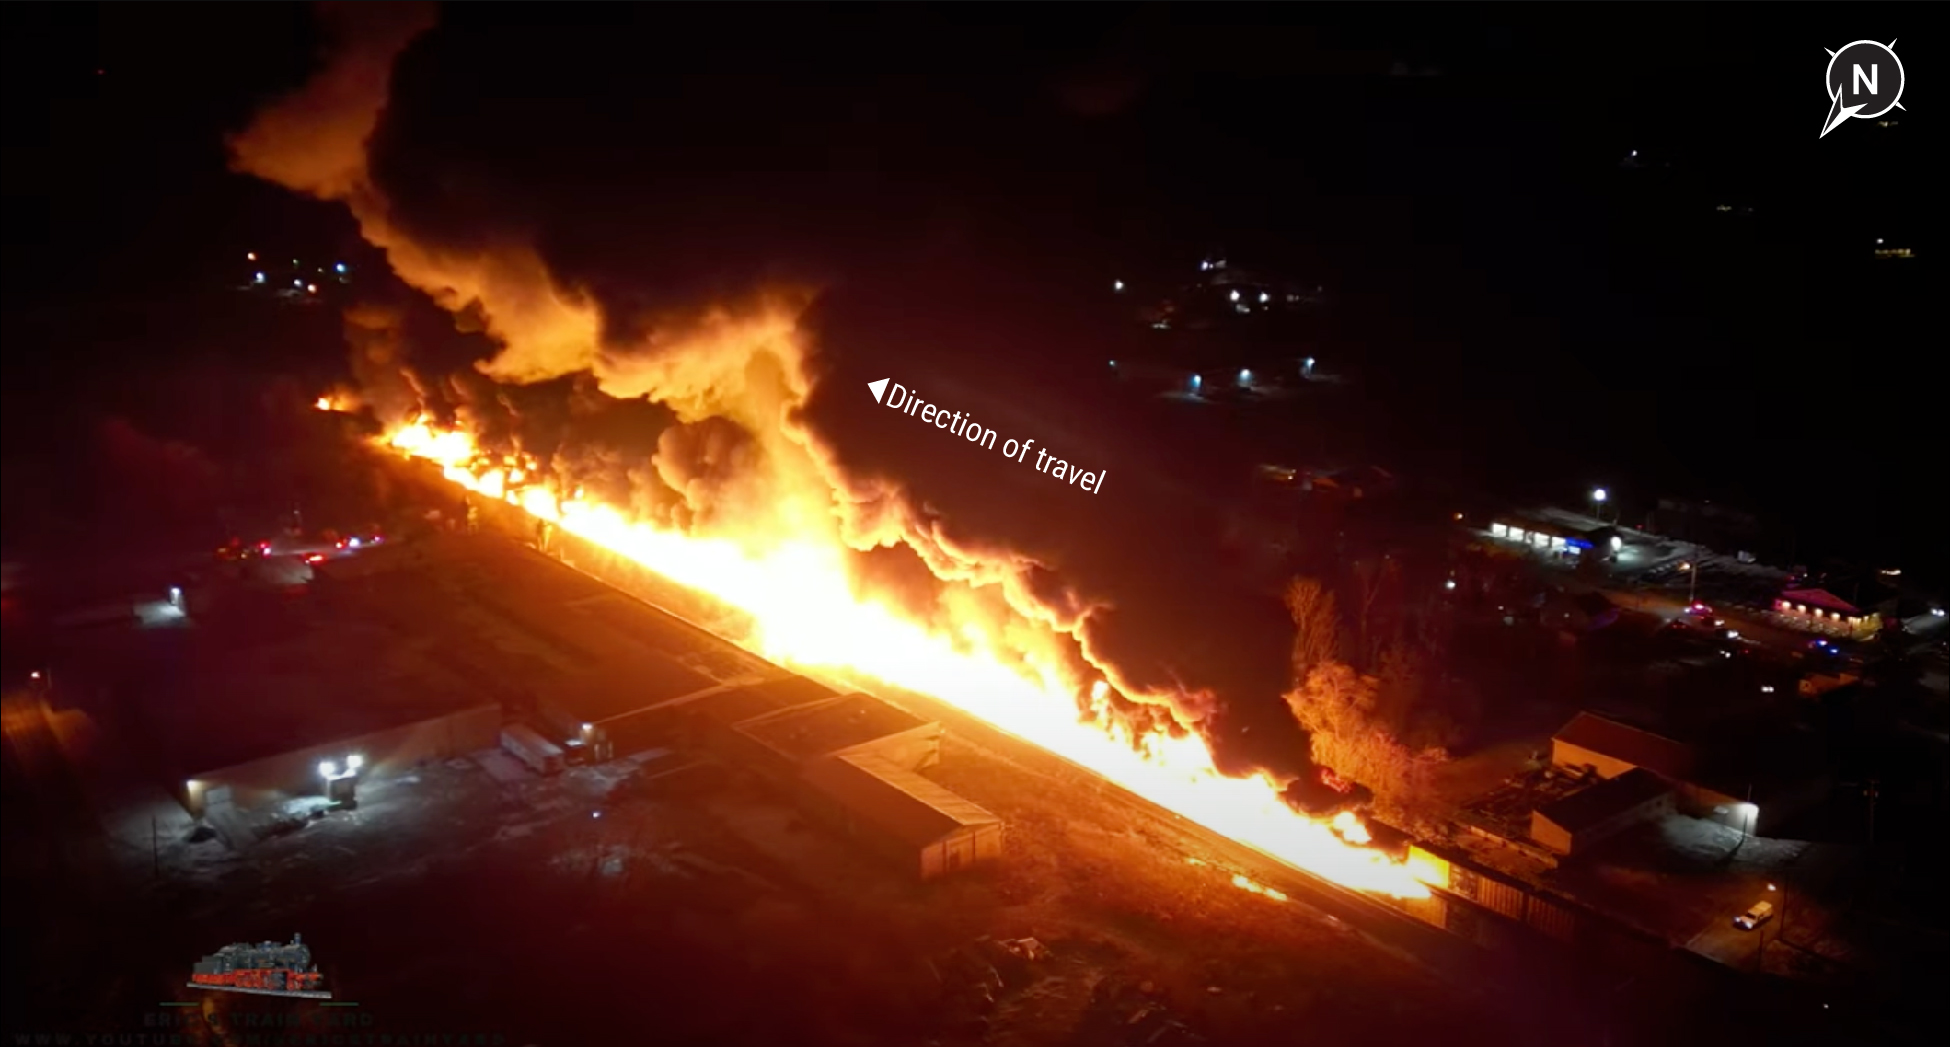 Overhead view of derailment and early fire.